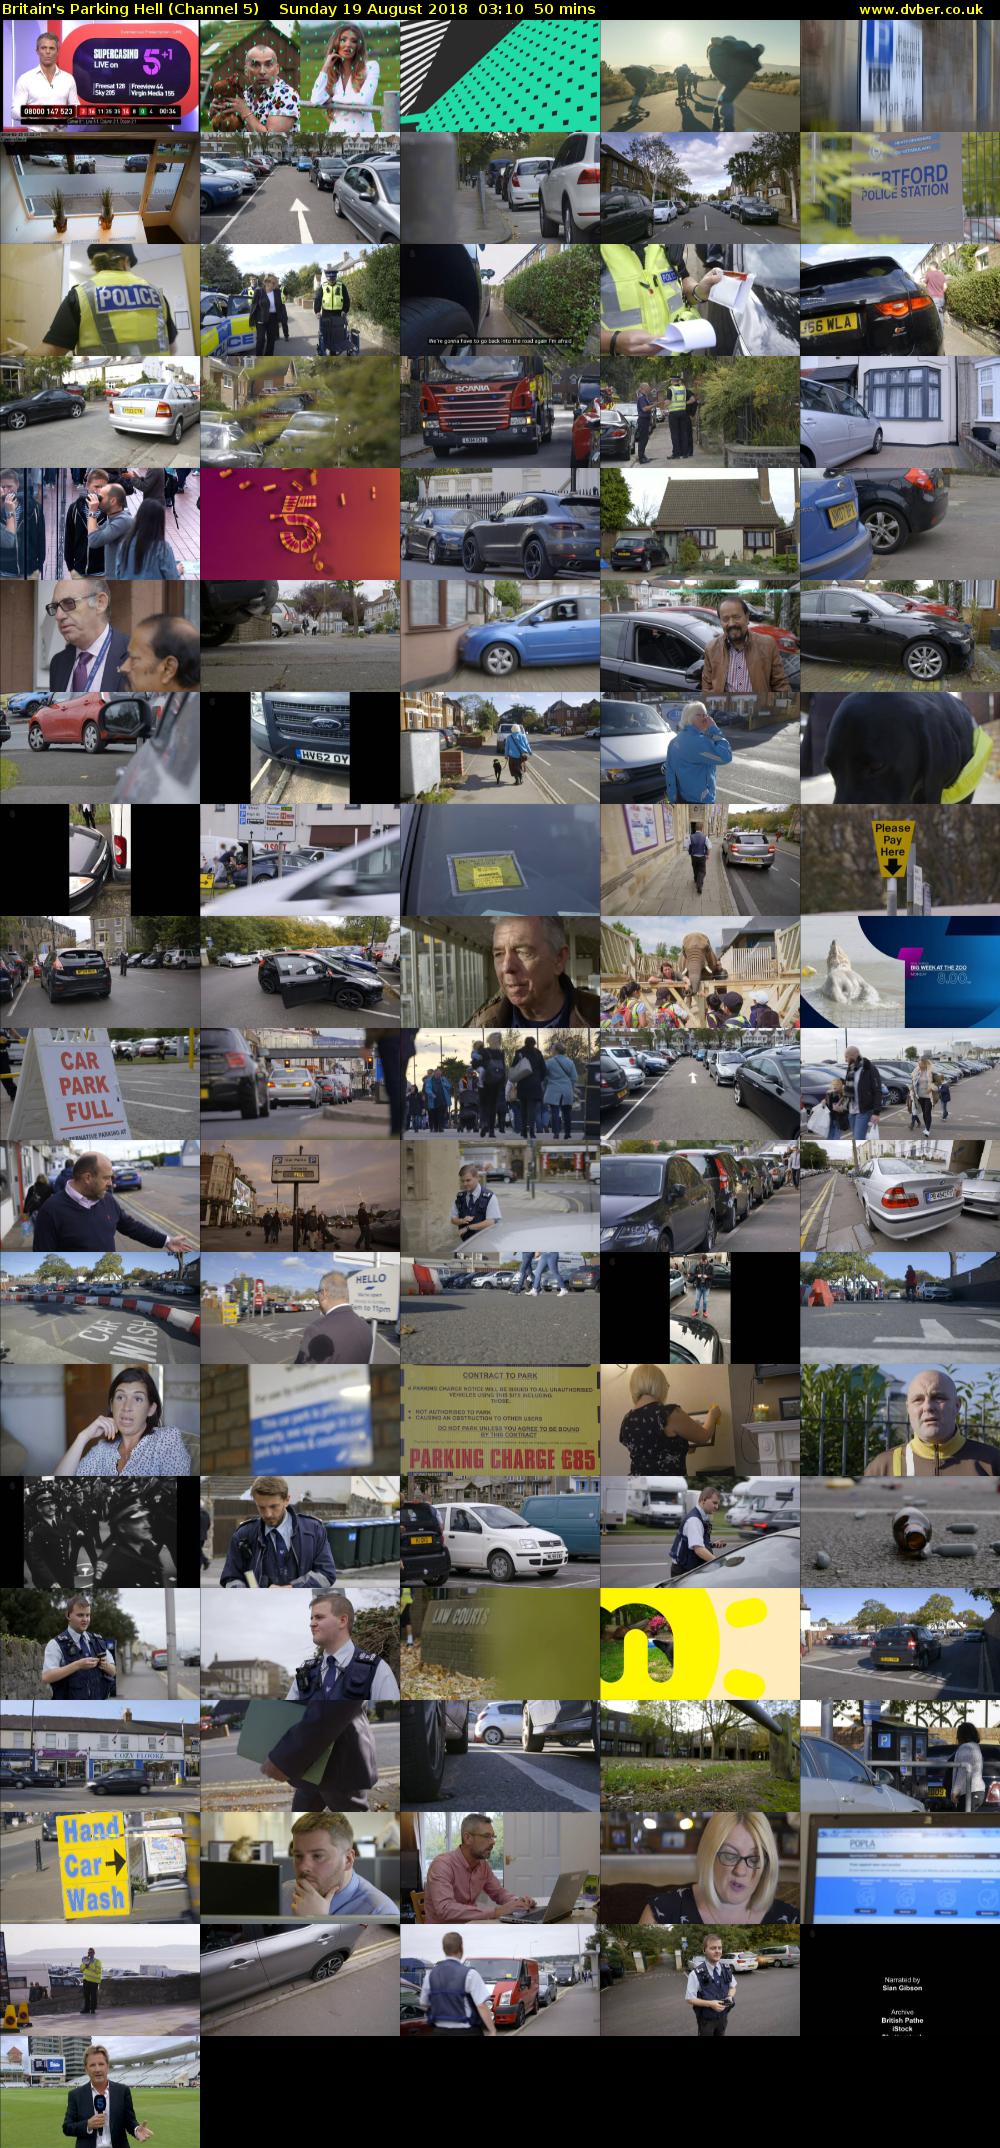 Britain's Parking Hell (Channel 5) Sunday 19 August 2018 03:10 - 04:00